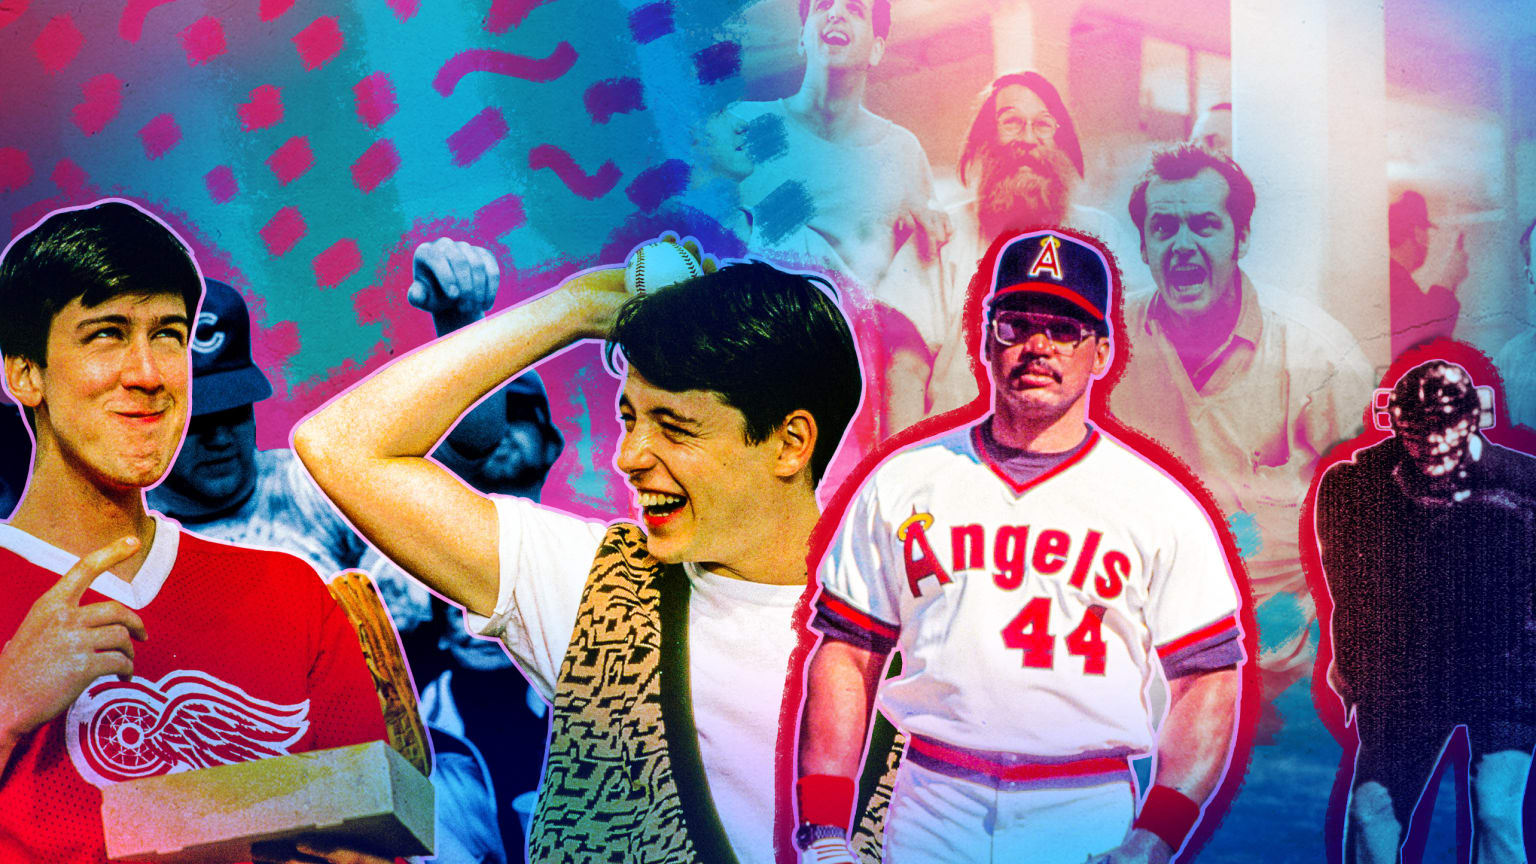 Designed montage image of baseball scenes in movies